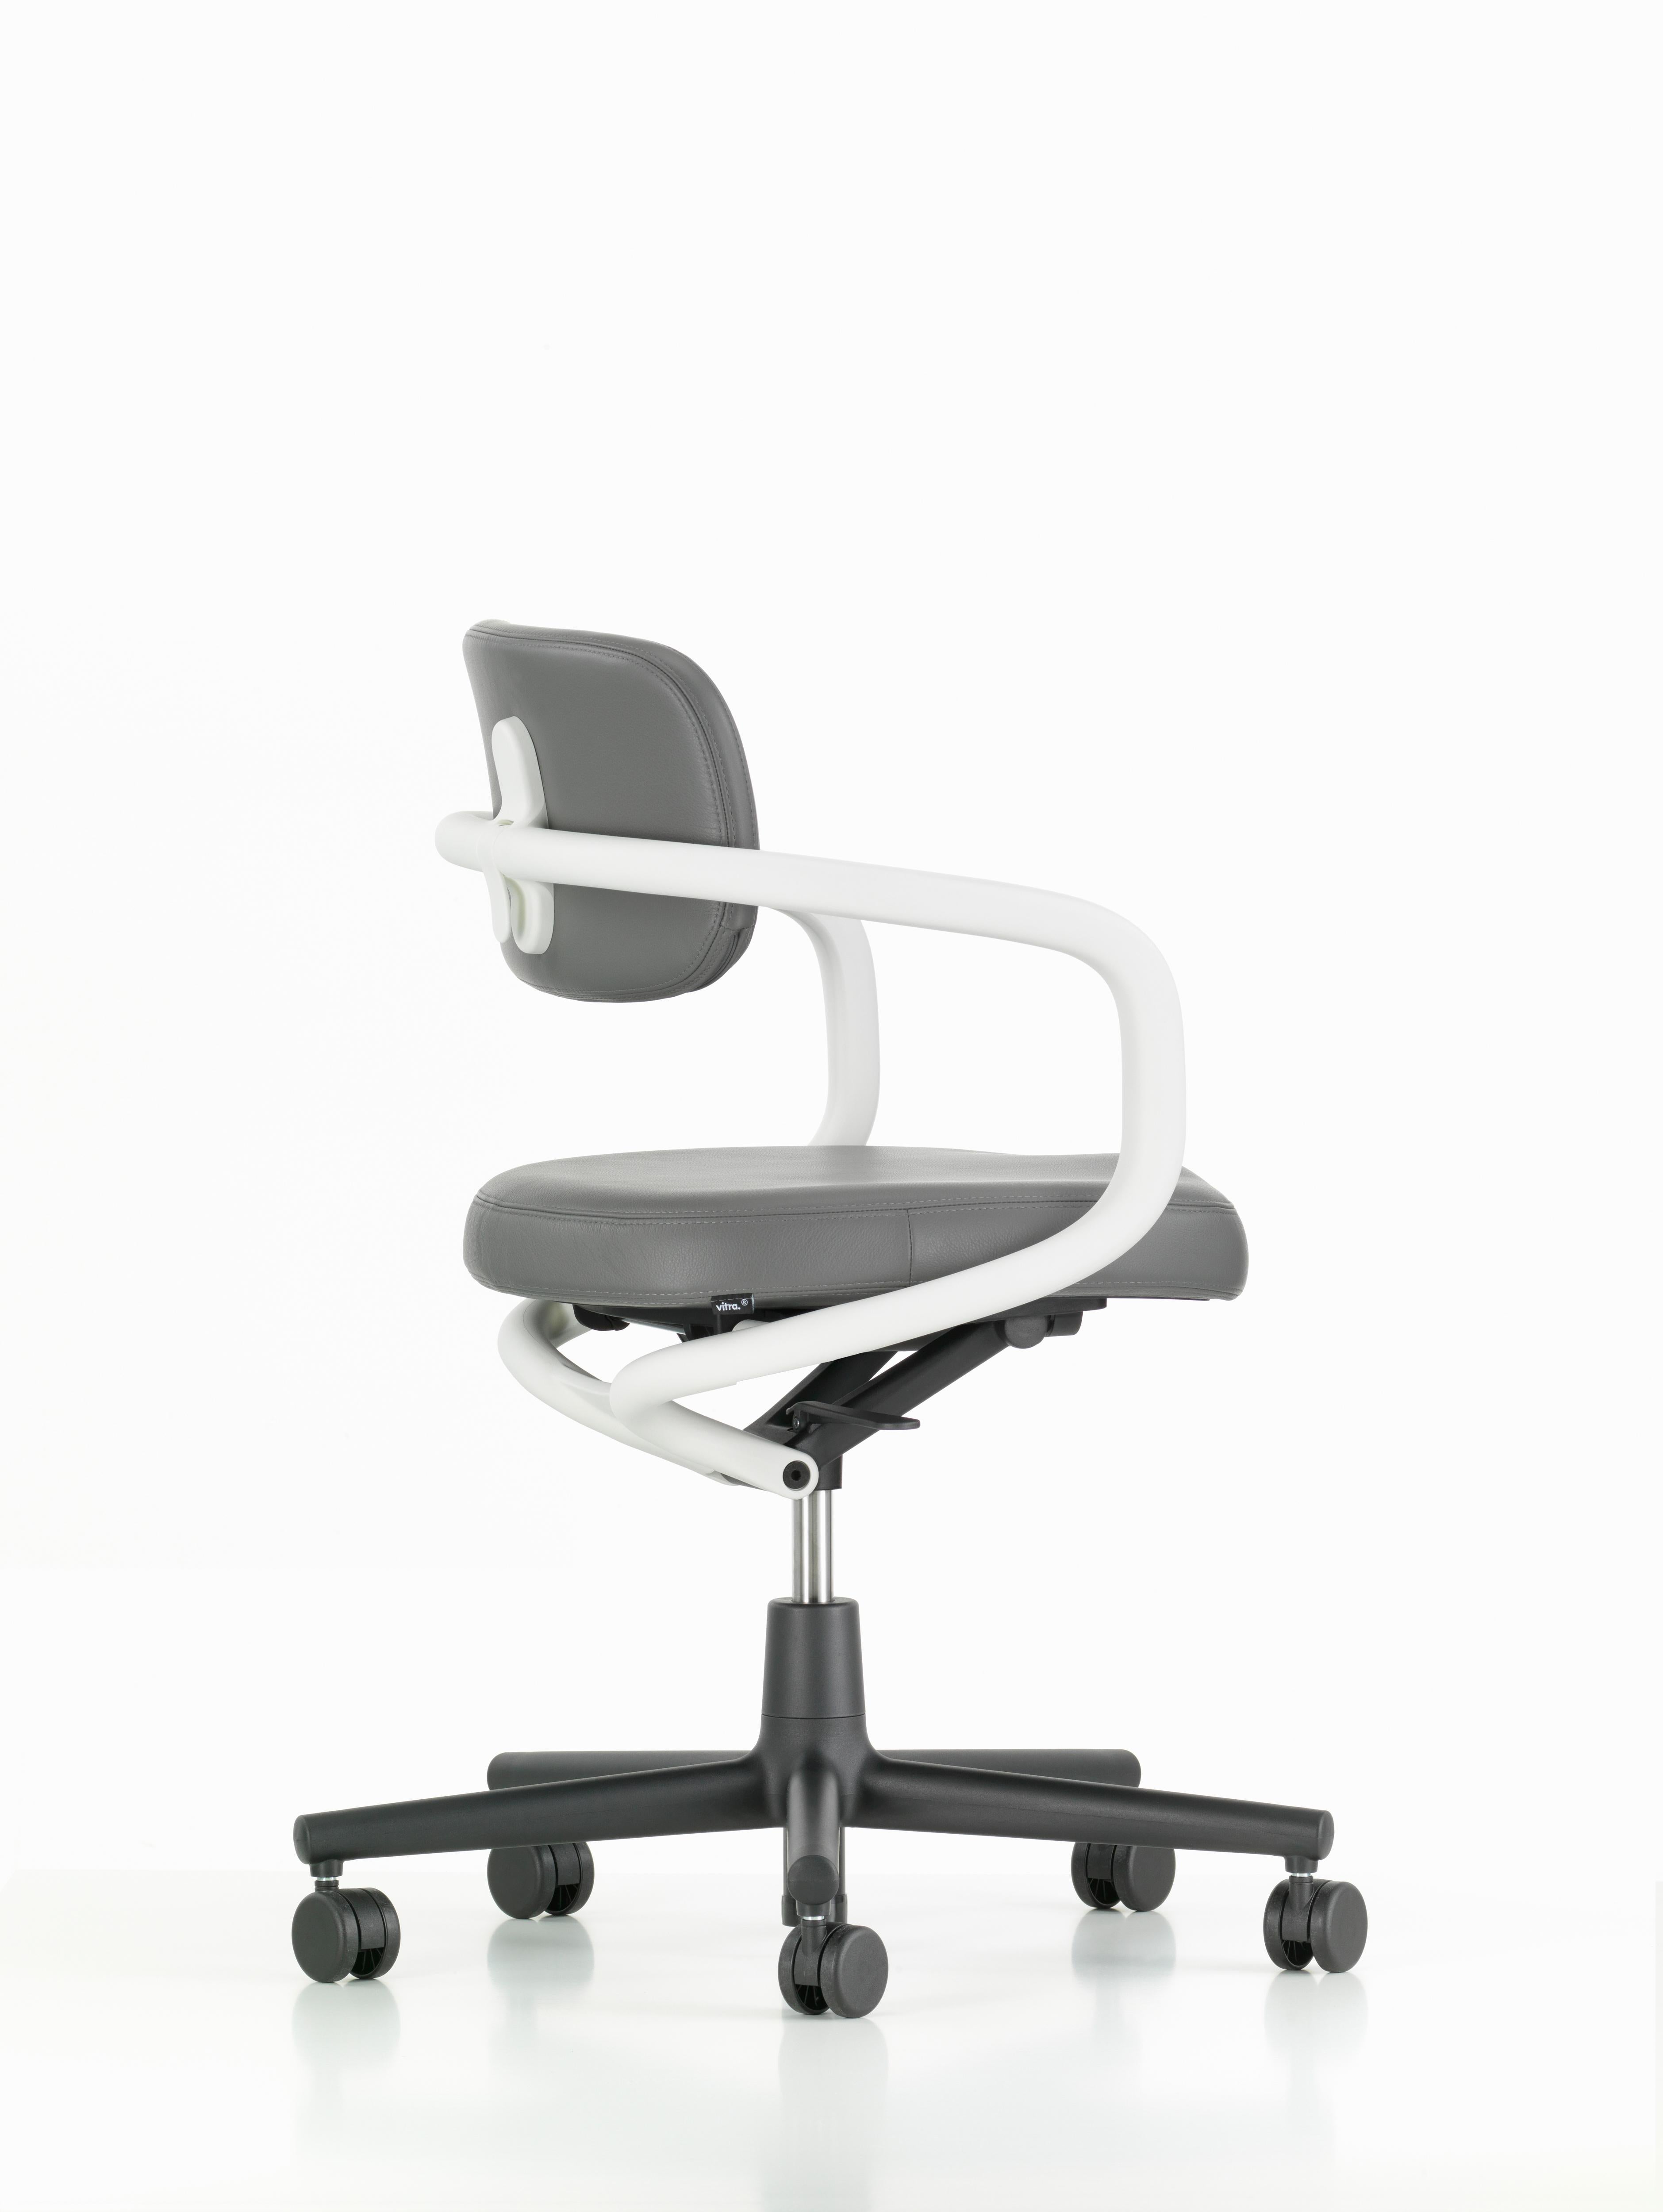 Modern Vitra Allstar Chair in Dim Grey Leather by Konstantin Grcic For Sale